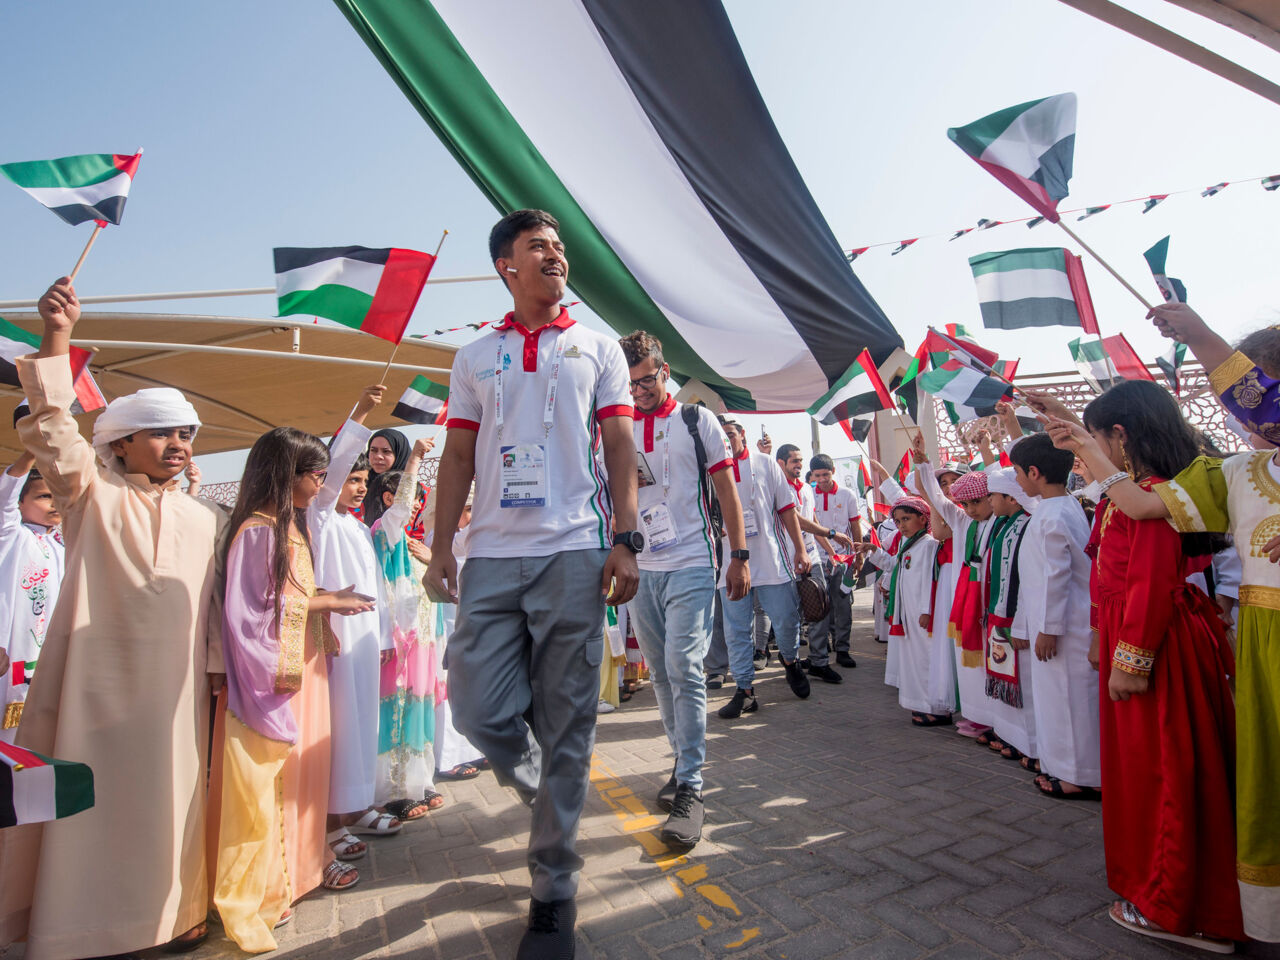 Students from ACTVET and ADEC schools in Abu Dhabi welcome competitors as part of the One School One Country programme at WorldSkills Abu Dhabi 2017.